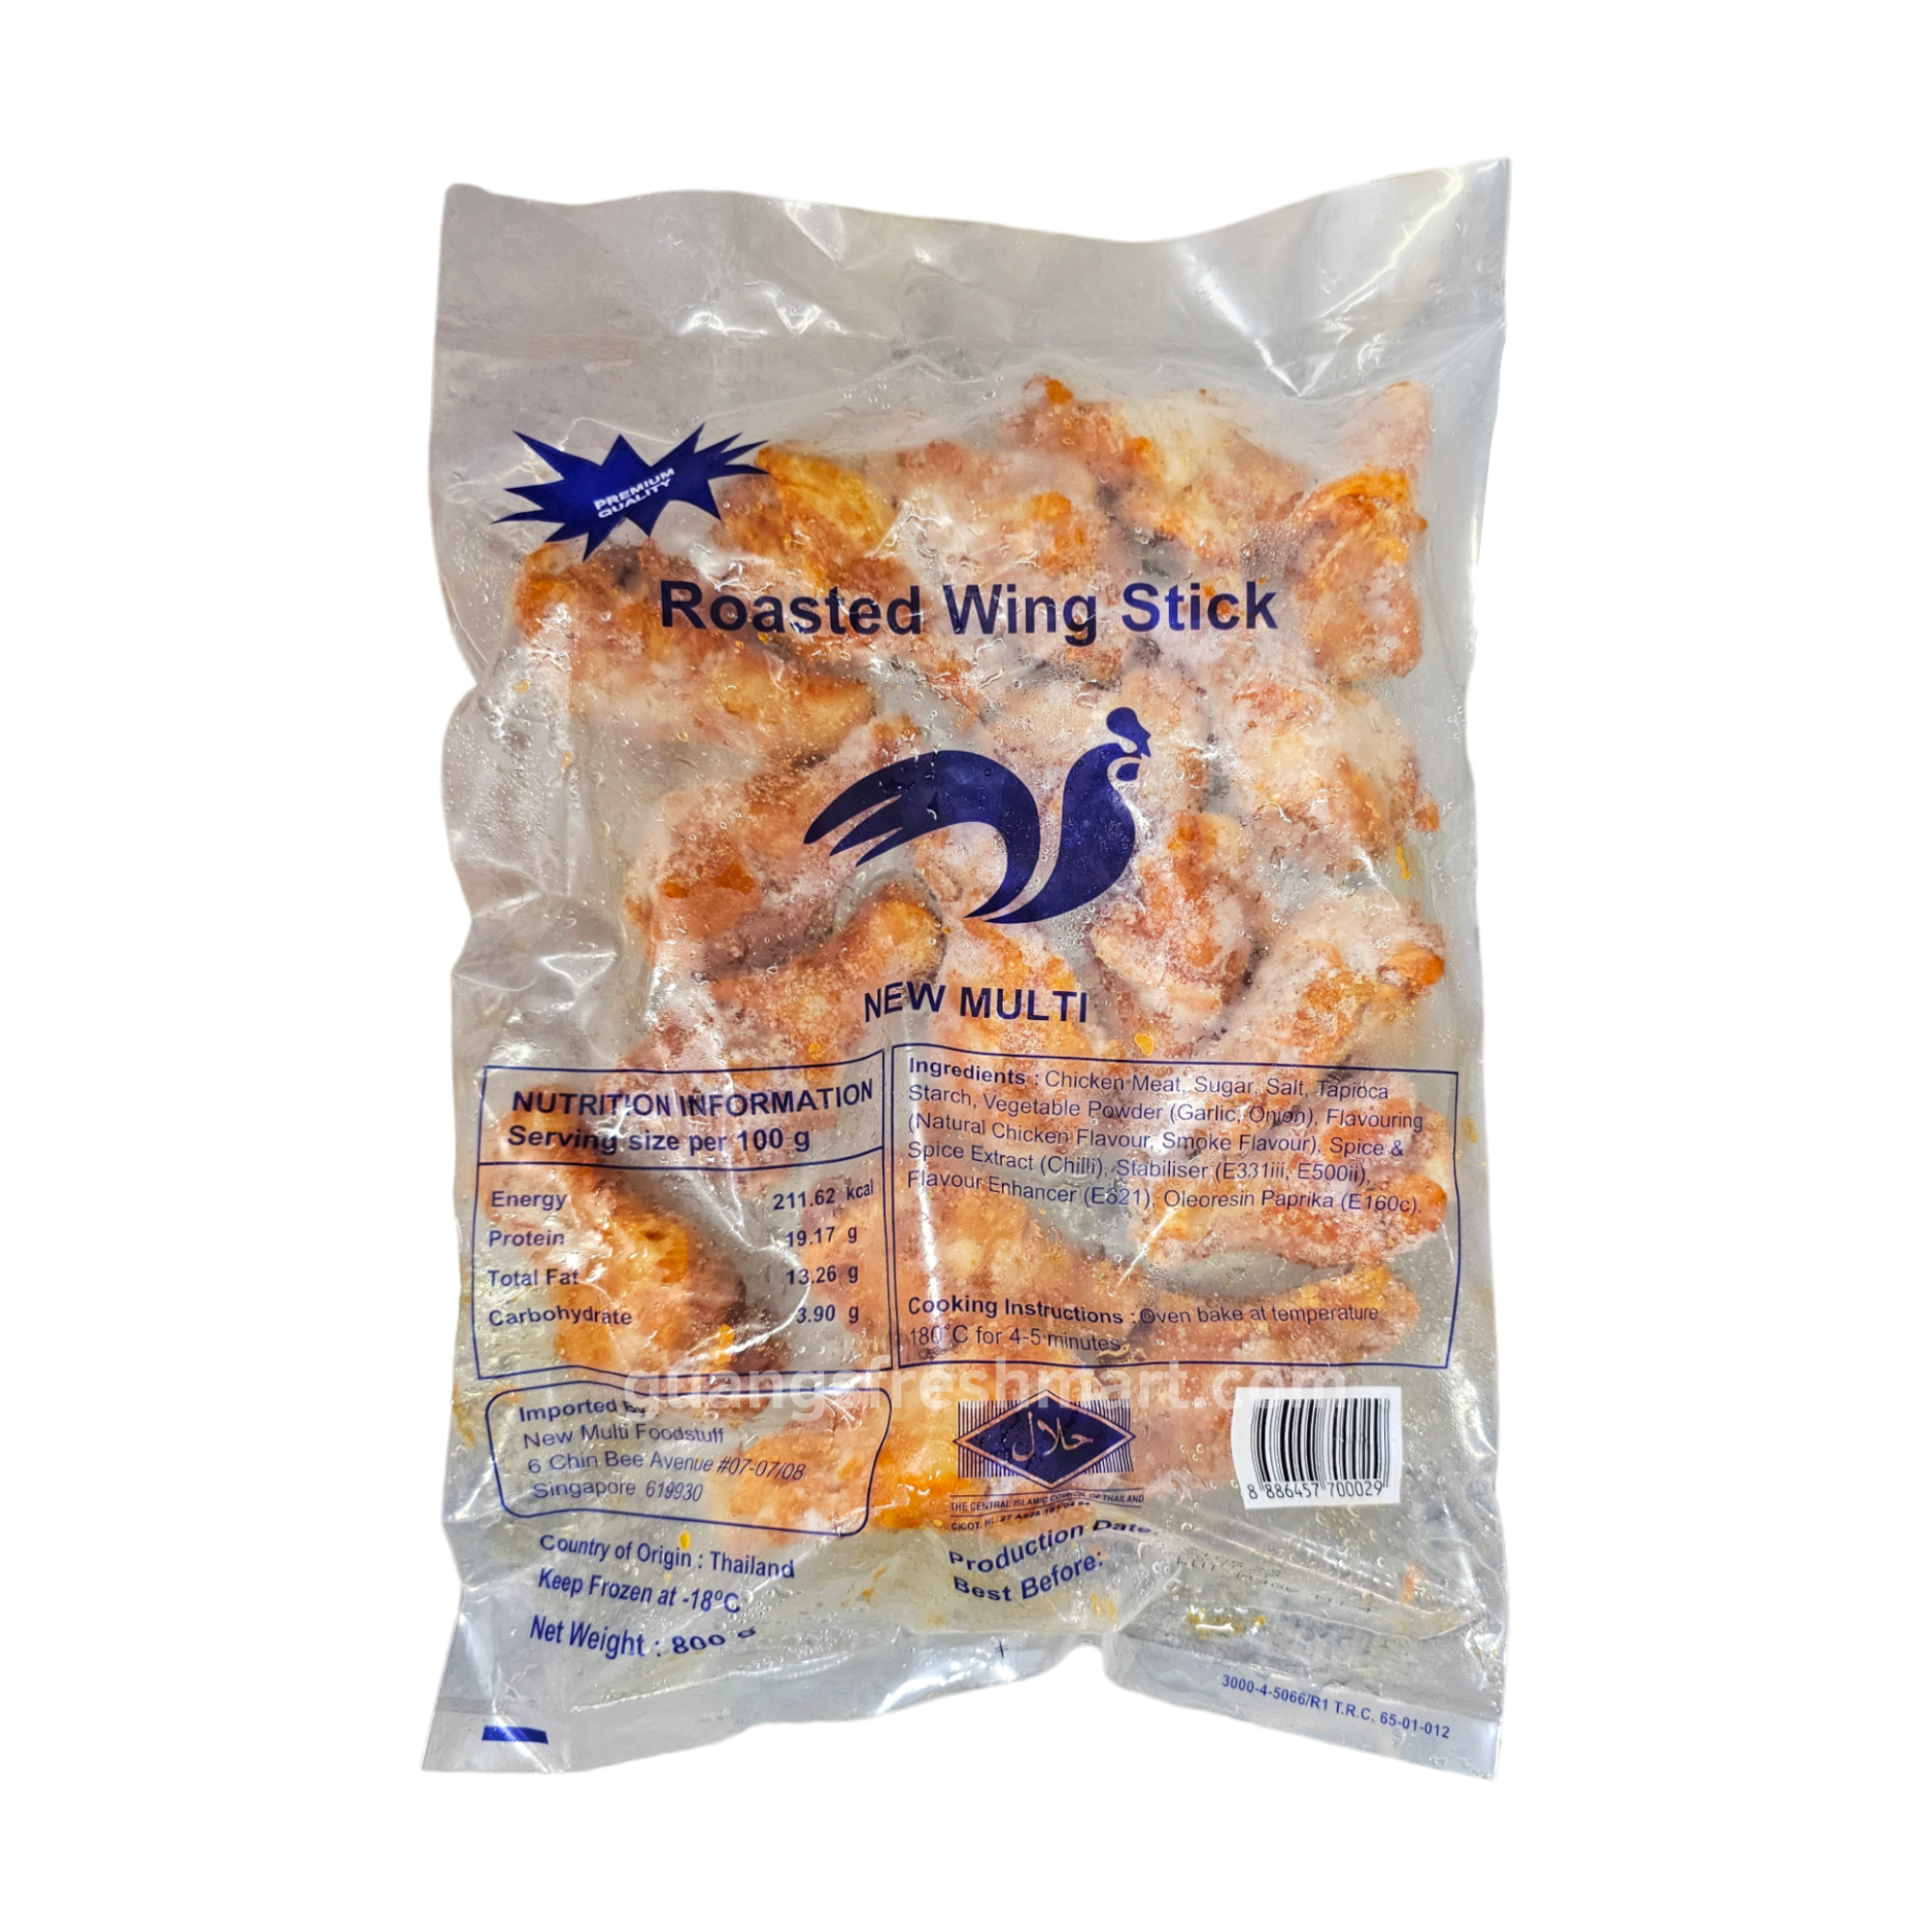 New Multi Roasted Chicken Wing Stick (800g)